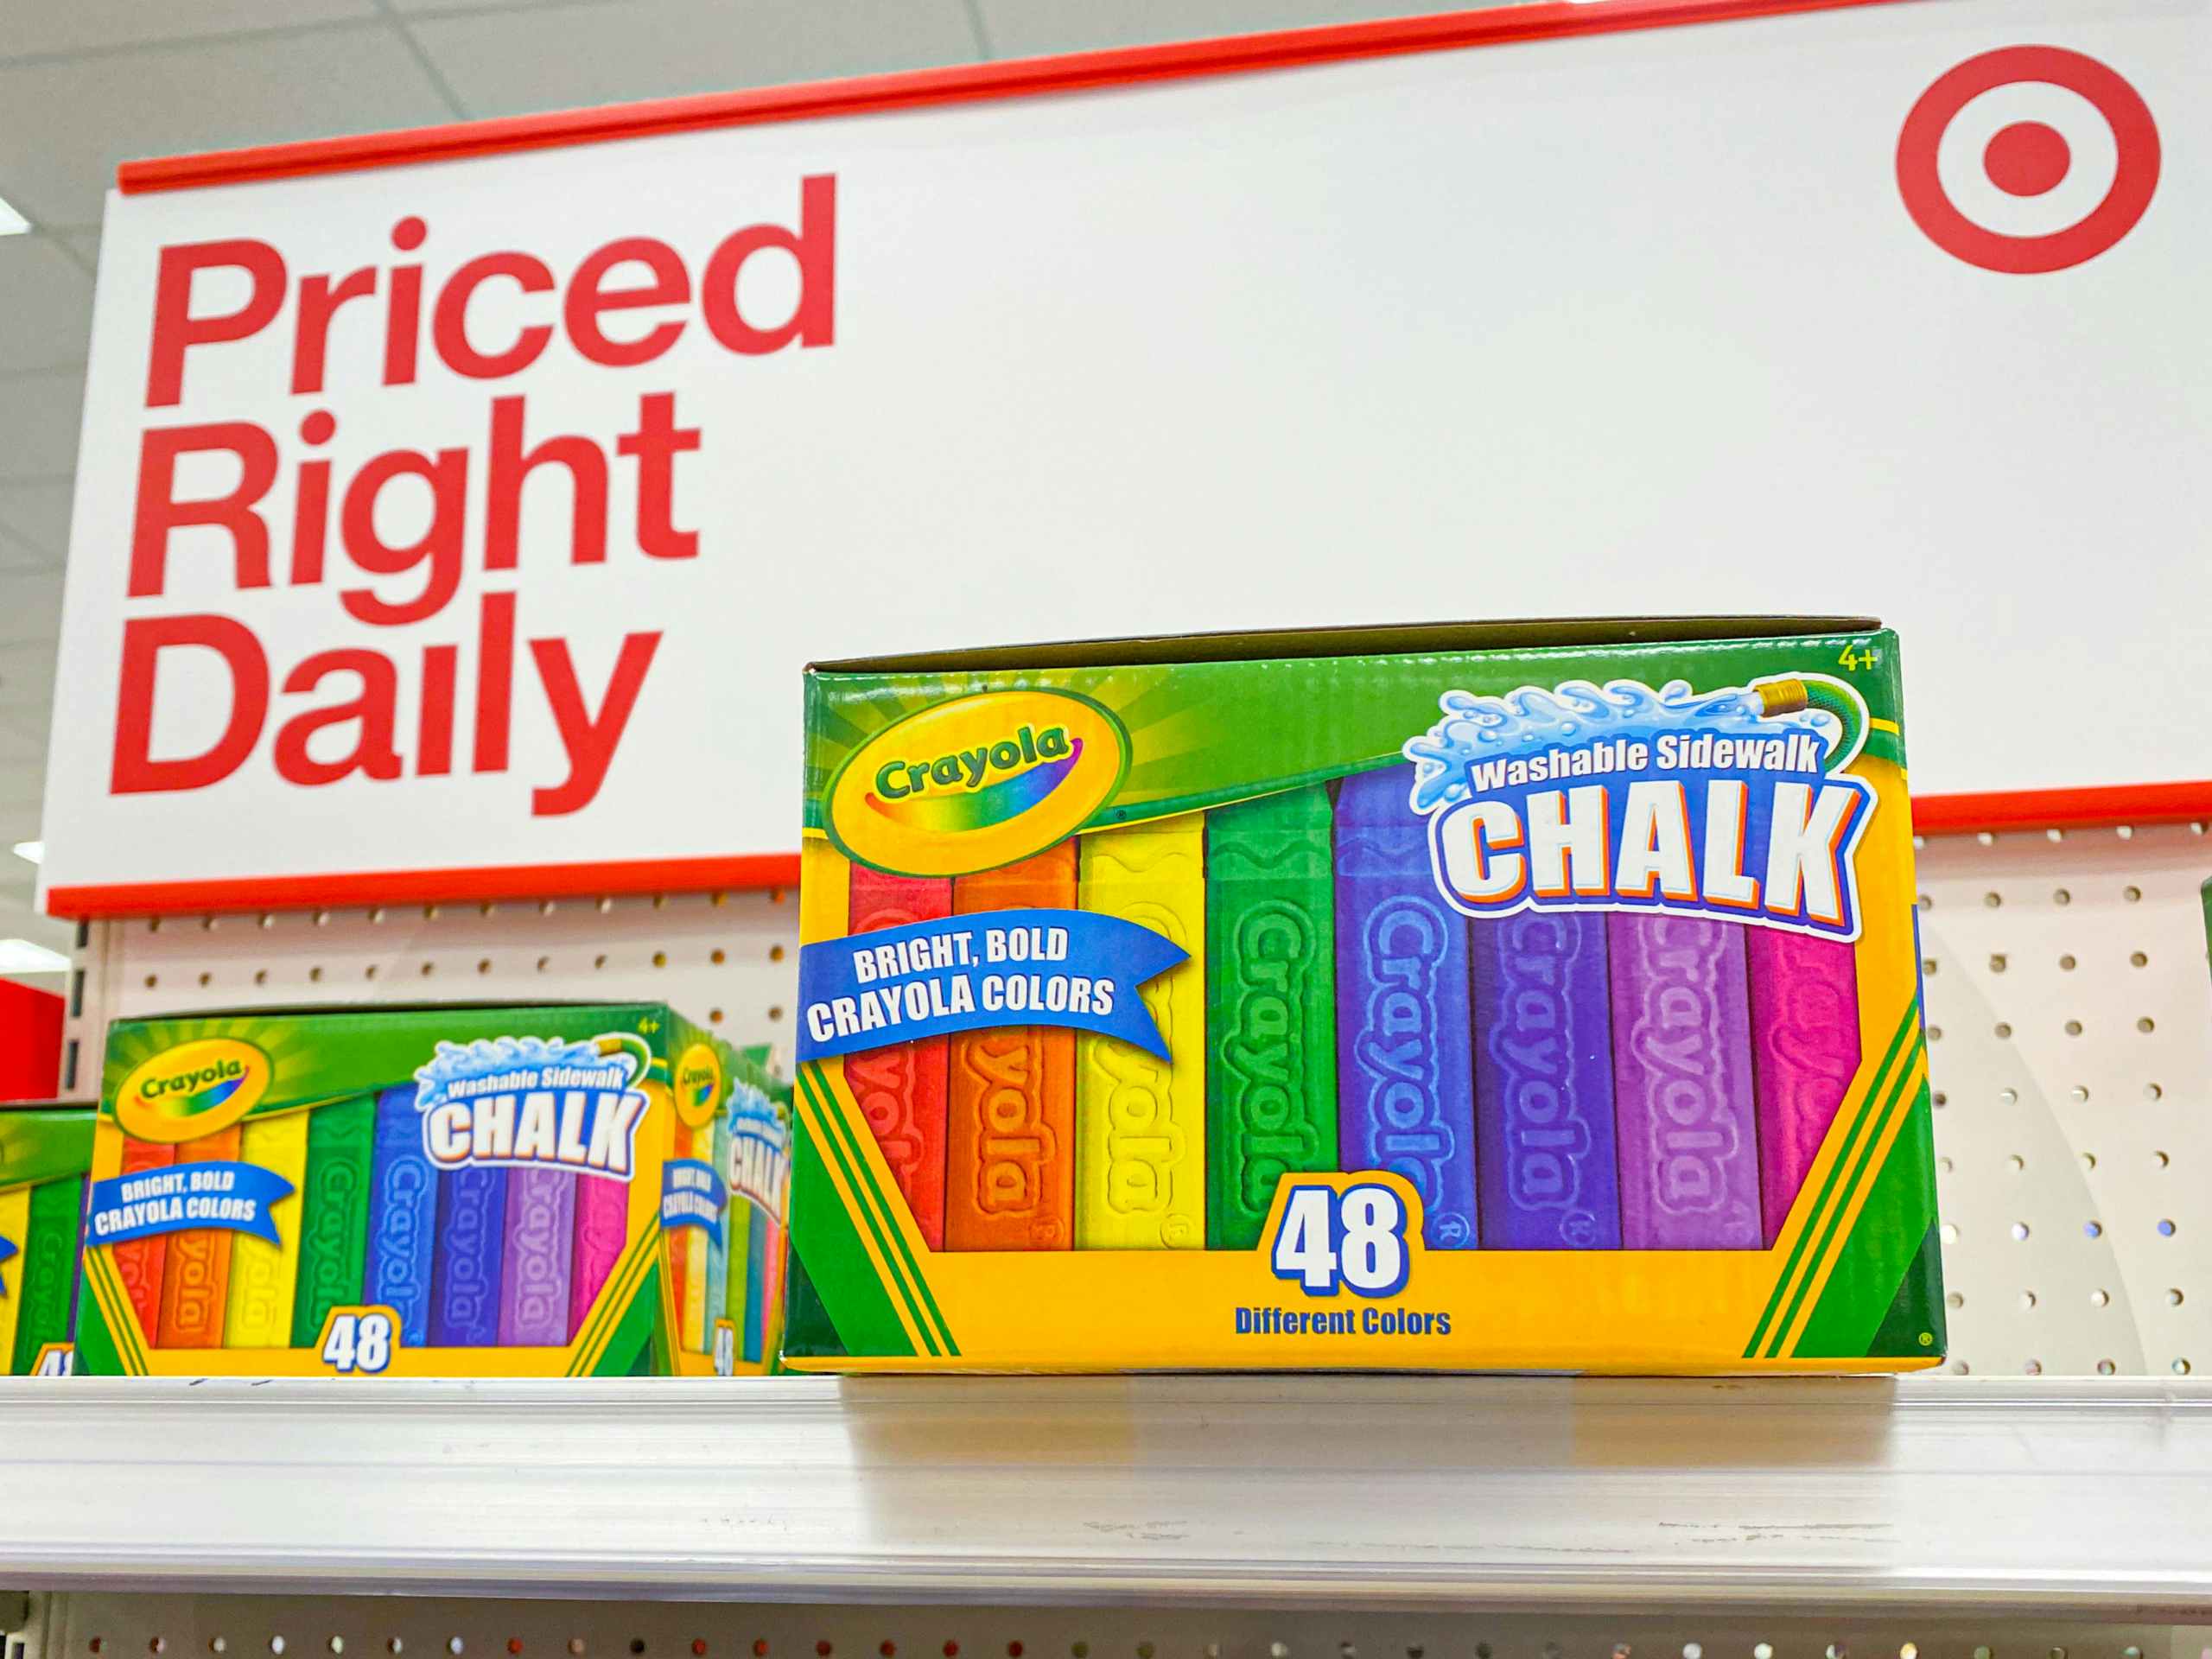 Boxes of 48 count Crayola Washable Sidewalk Chalk stocked on an endcap shelf at Target, in front of a sign that says, "Priced Right Daily